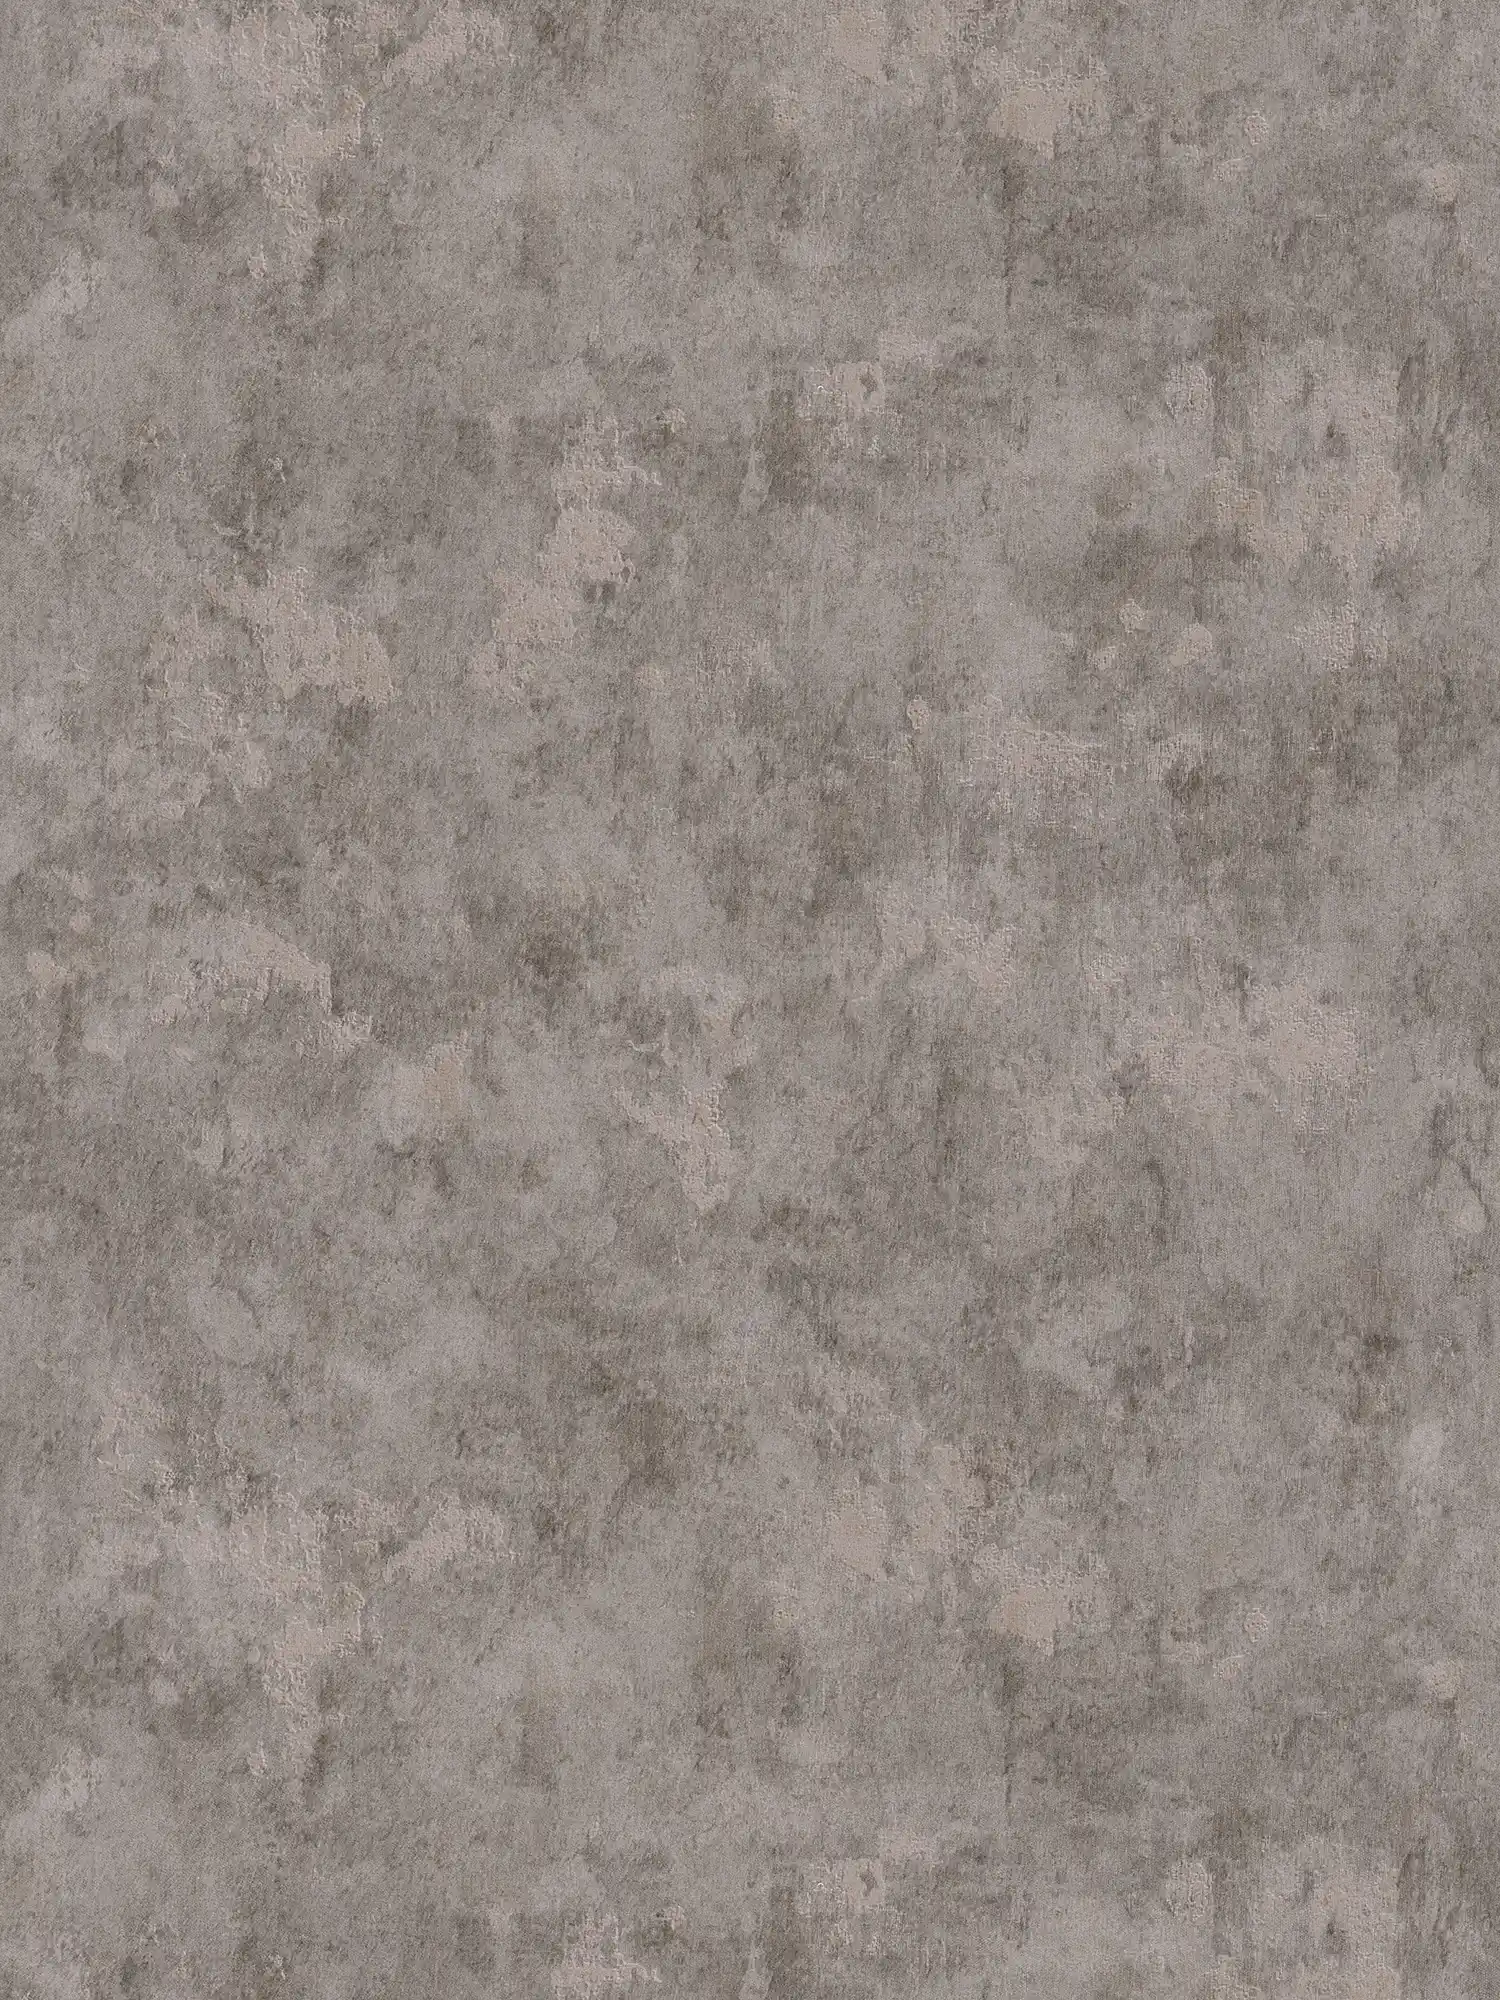         Vintage style wallpaper grey with satin sheen
    